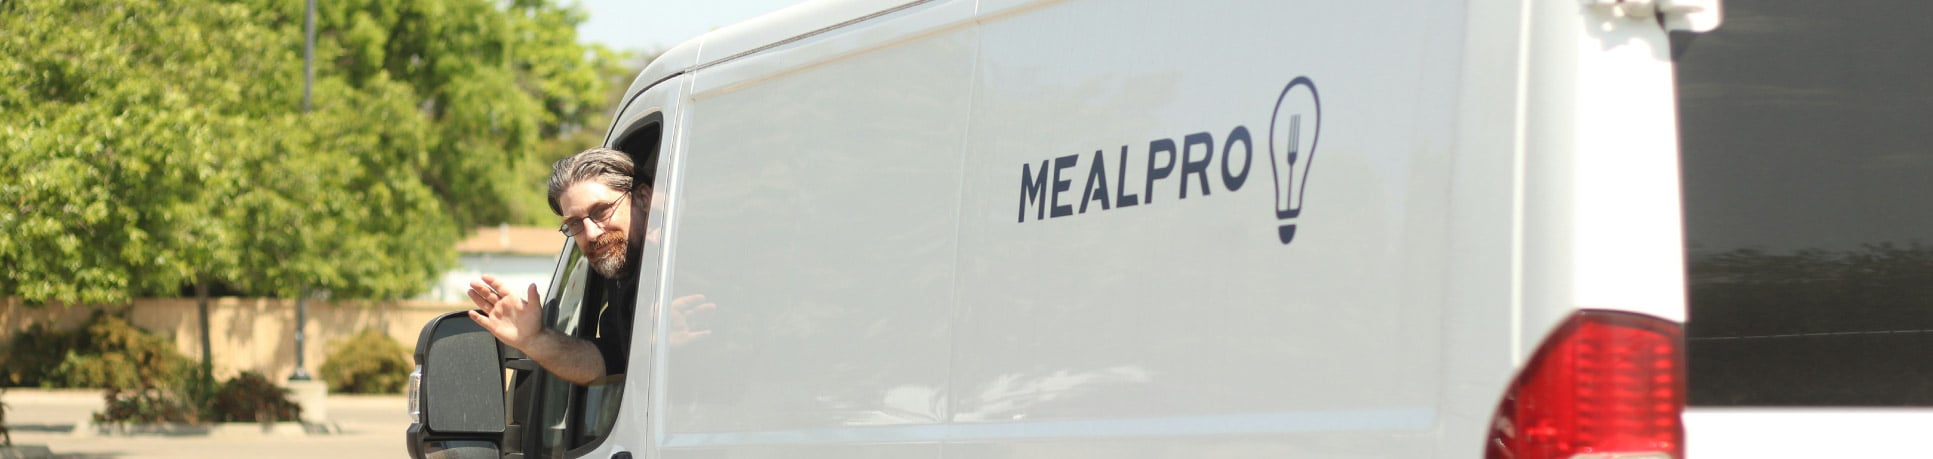 MealPro Ingredient Sourcing